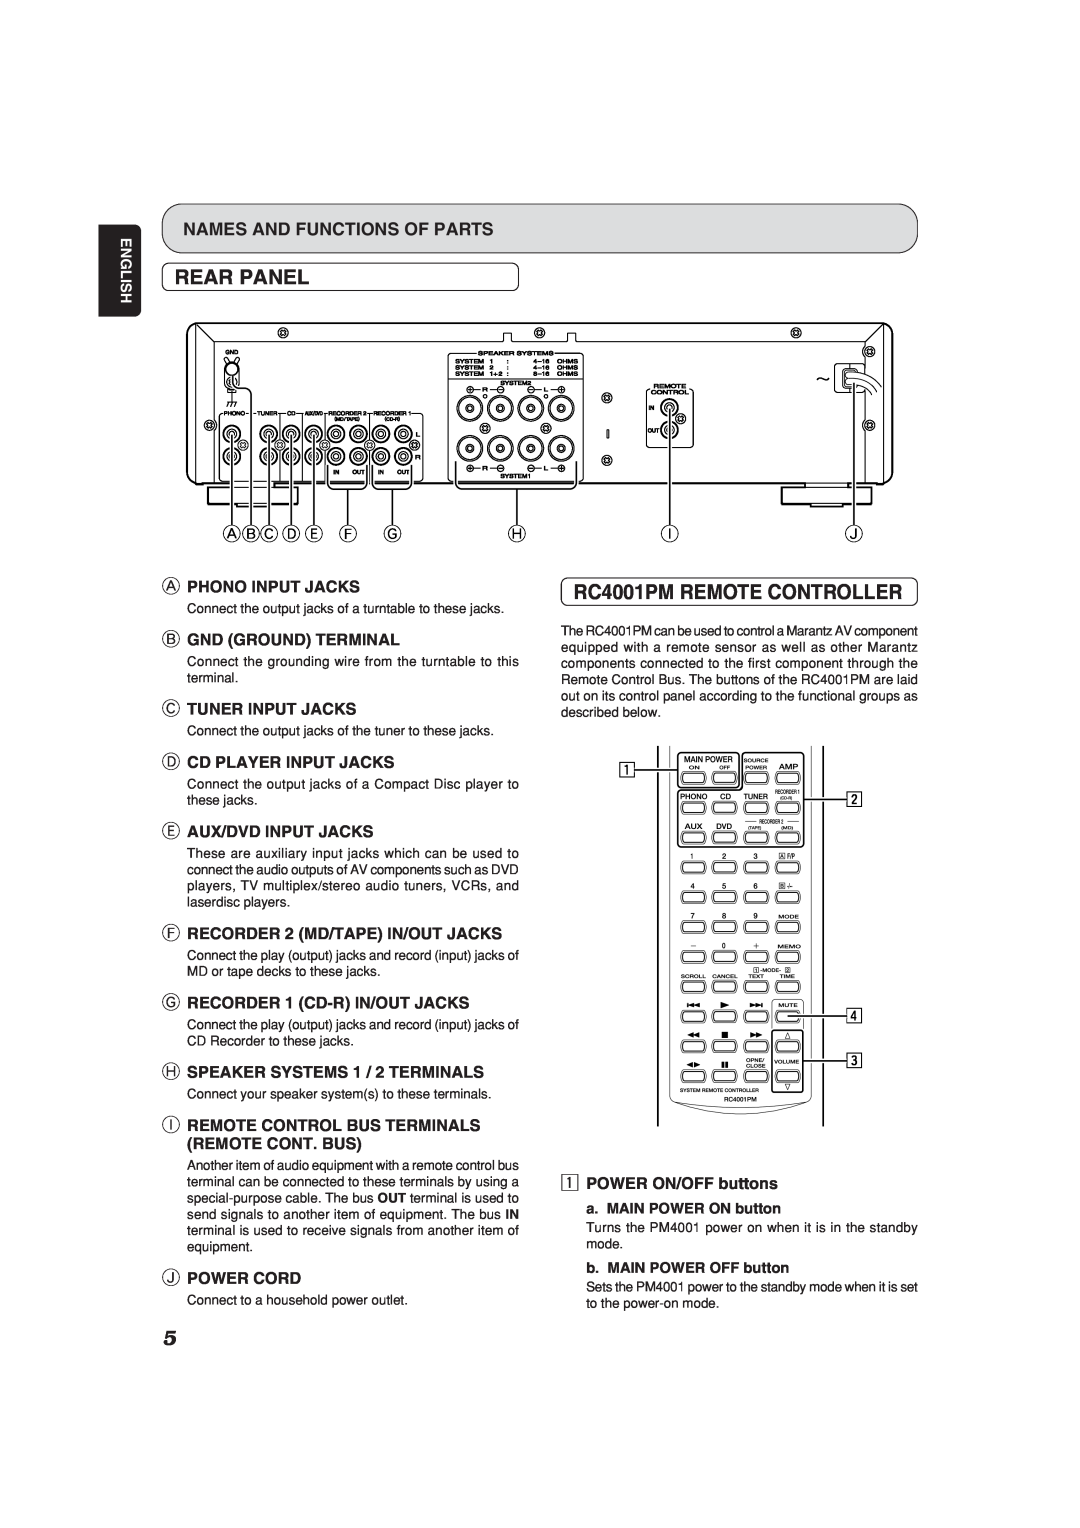 Marantz PM4001OSE manual RC4001PM REMOTE CONTROLLER, Names And Functions Of Parts, Abc D E F G, Rear Panel 